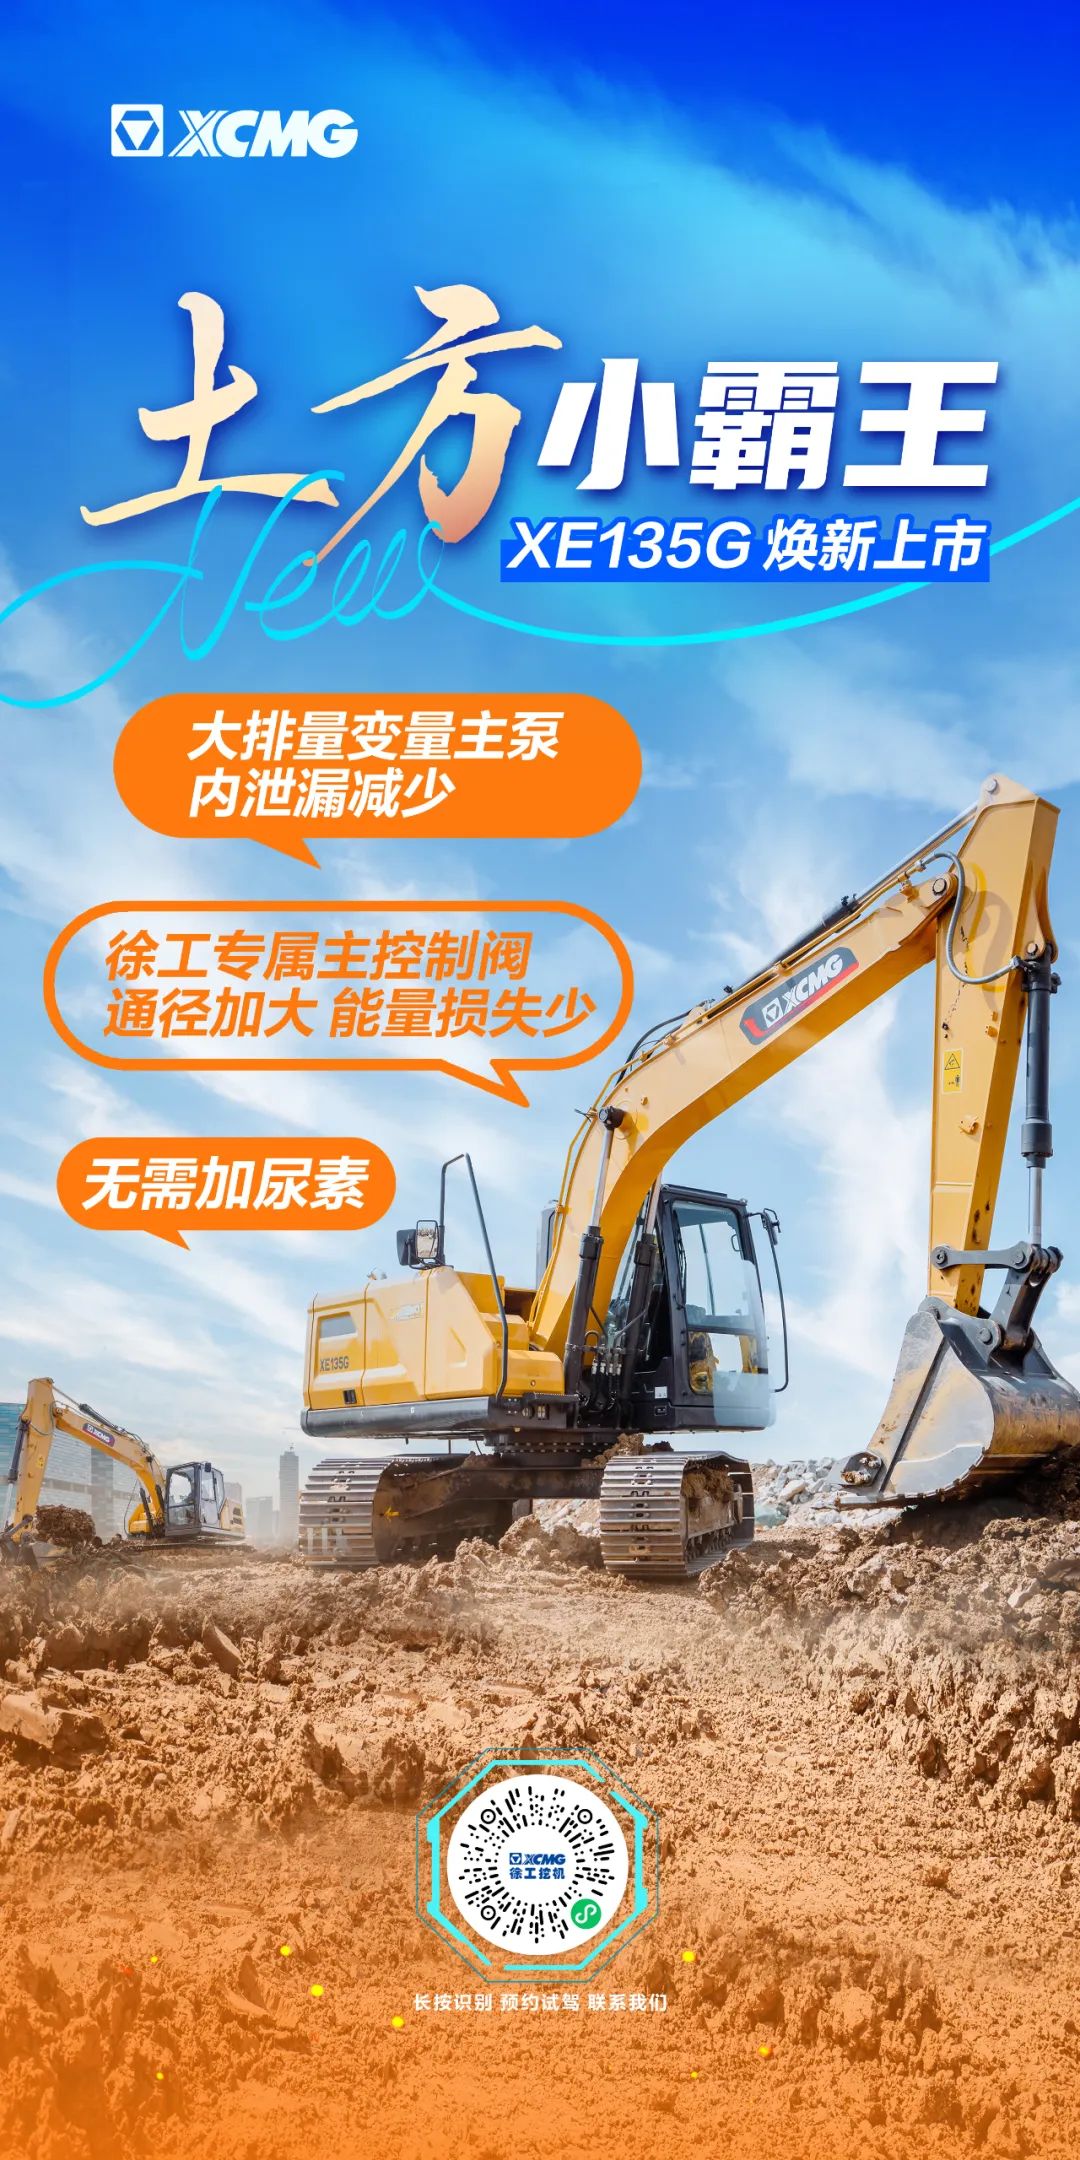 Xugong: I heard that this is the "dream car" that the construction robot is looking for?